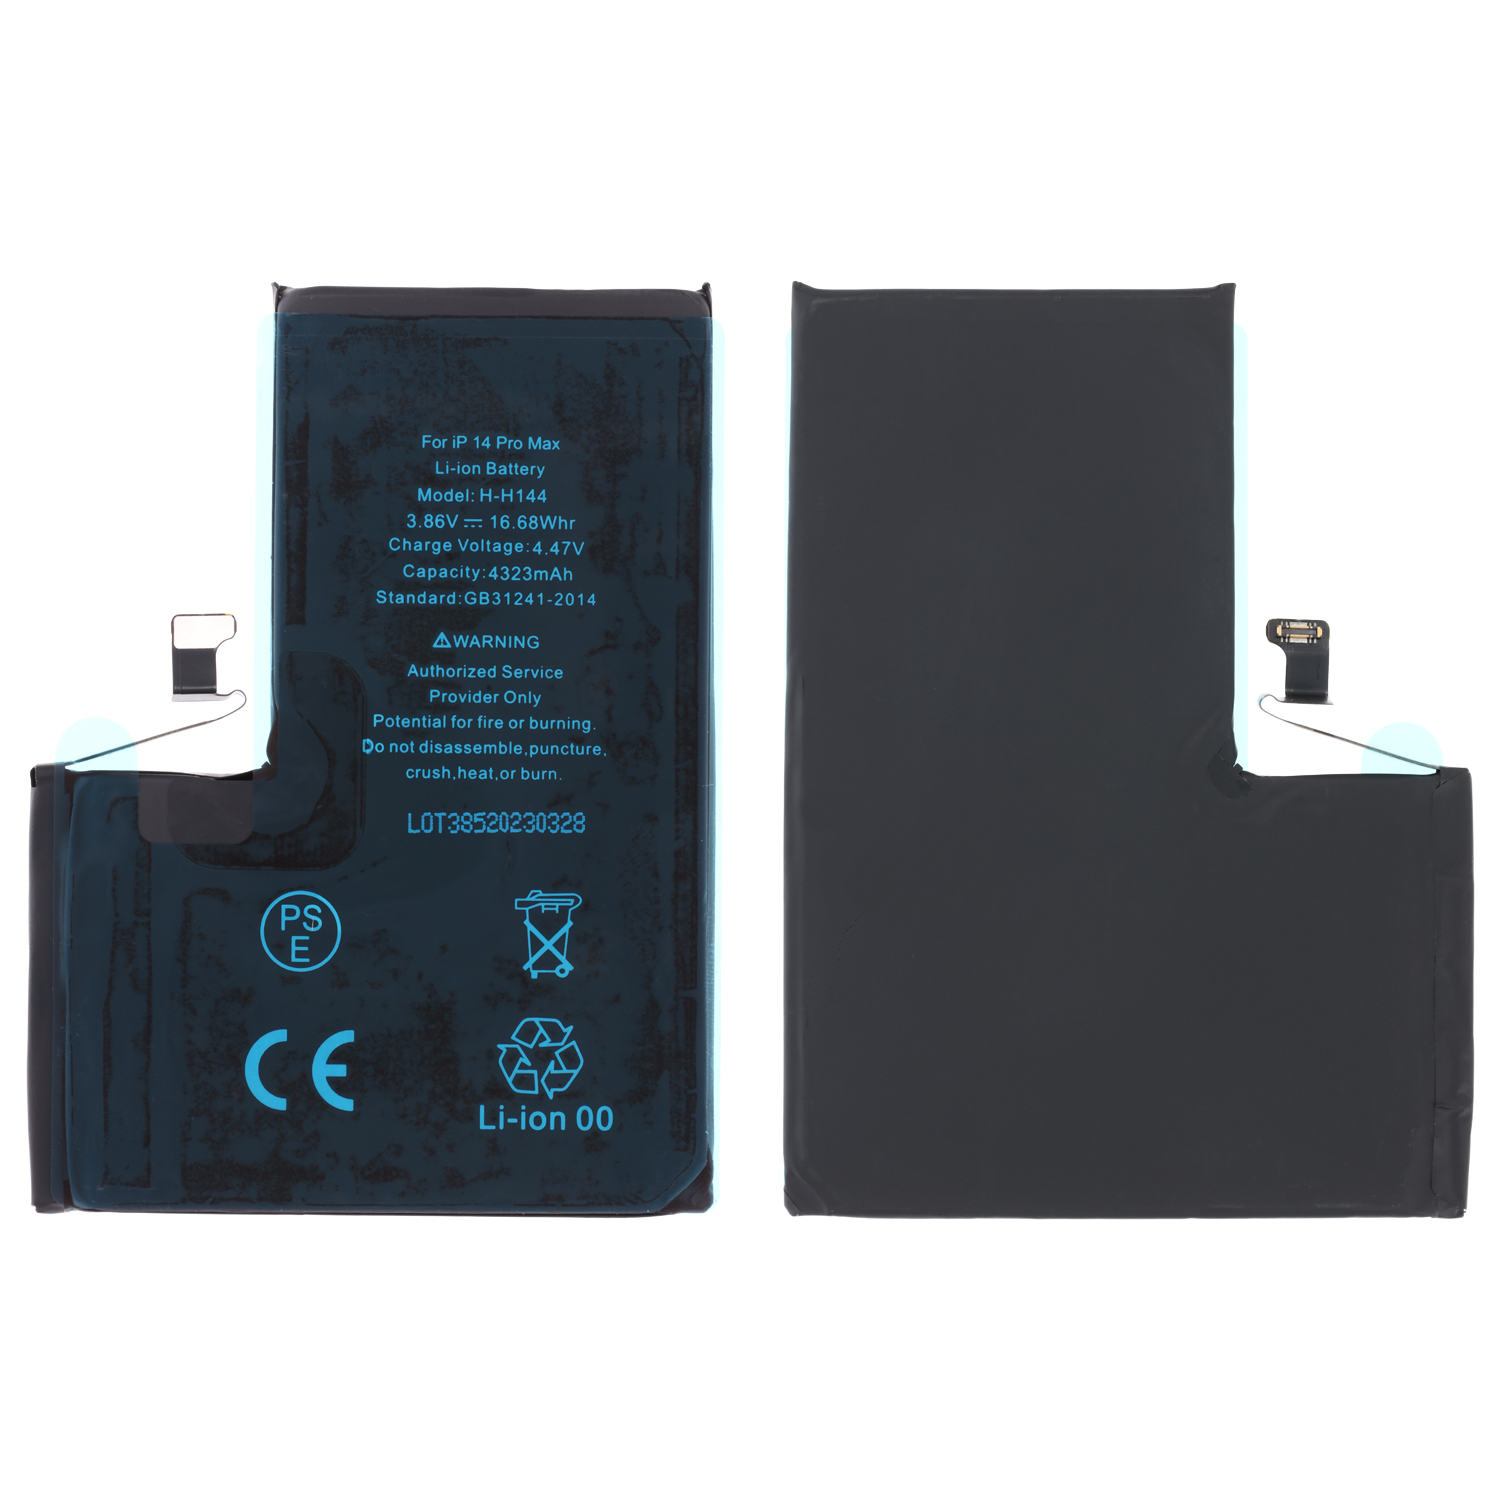 Battery Compatible with iPhone 14 Pro Max (A2894) incl. Battery Adhesive Sticker